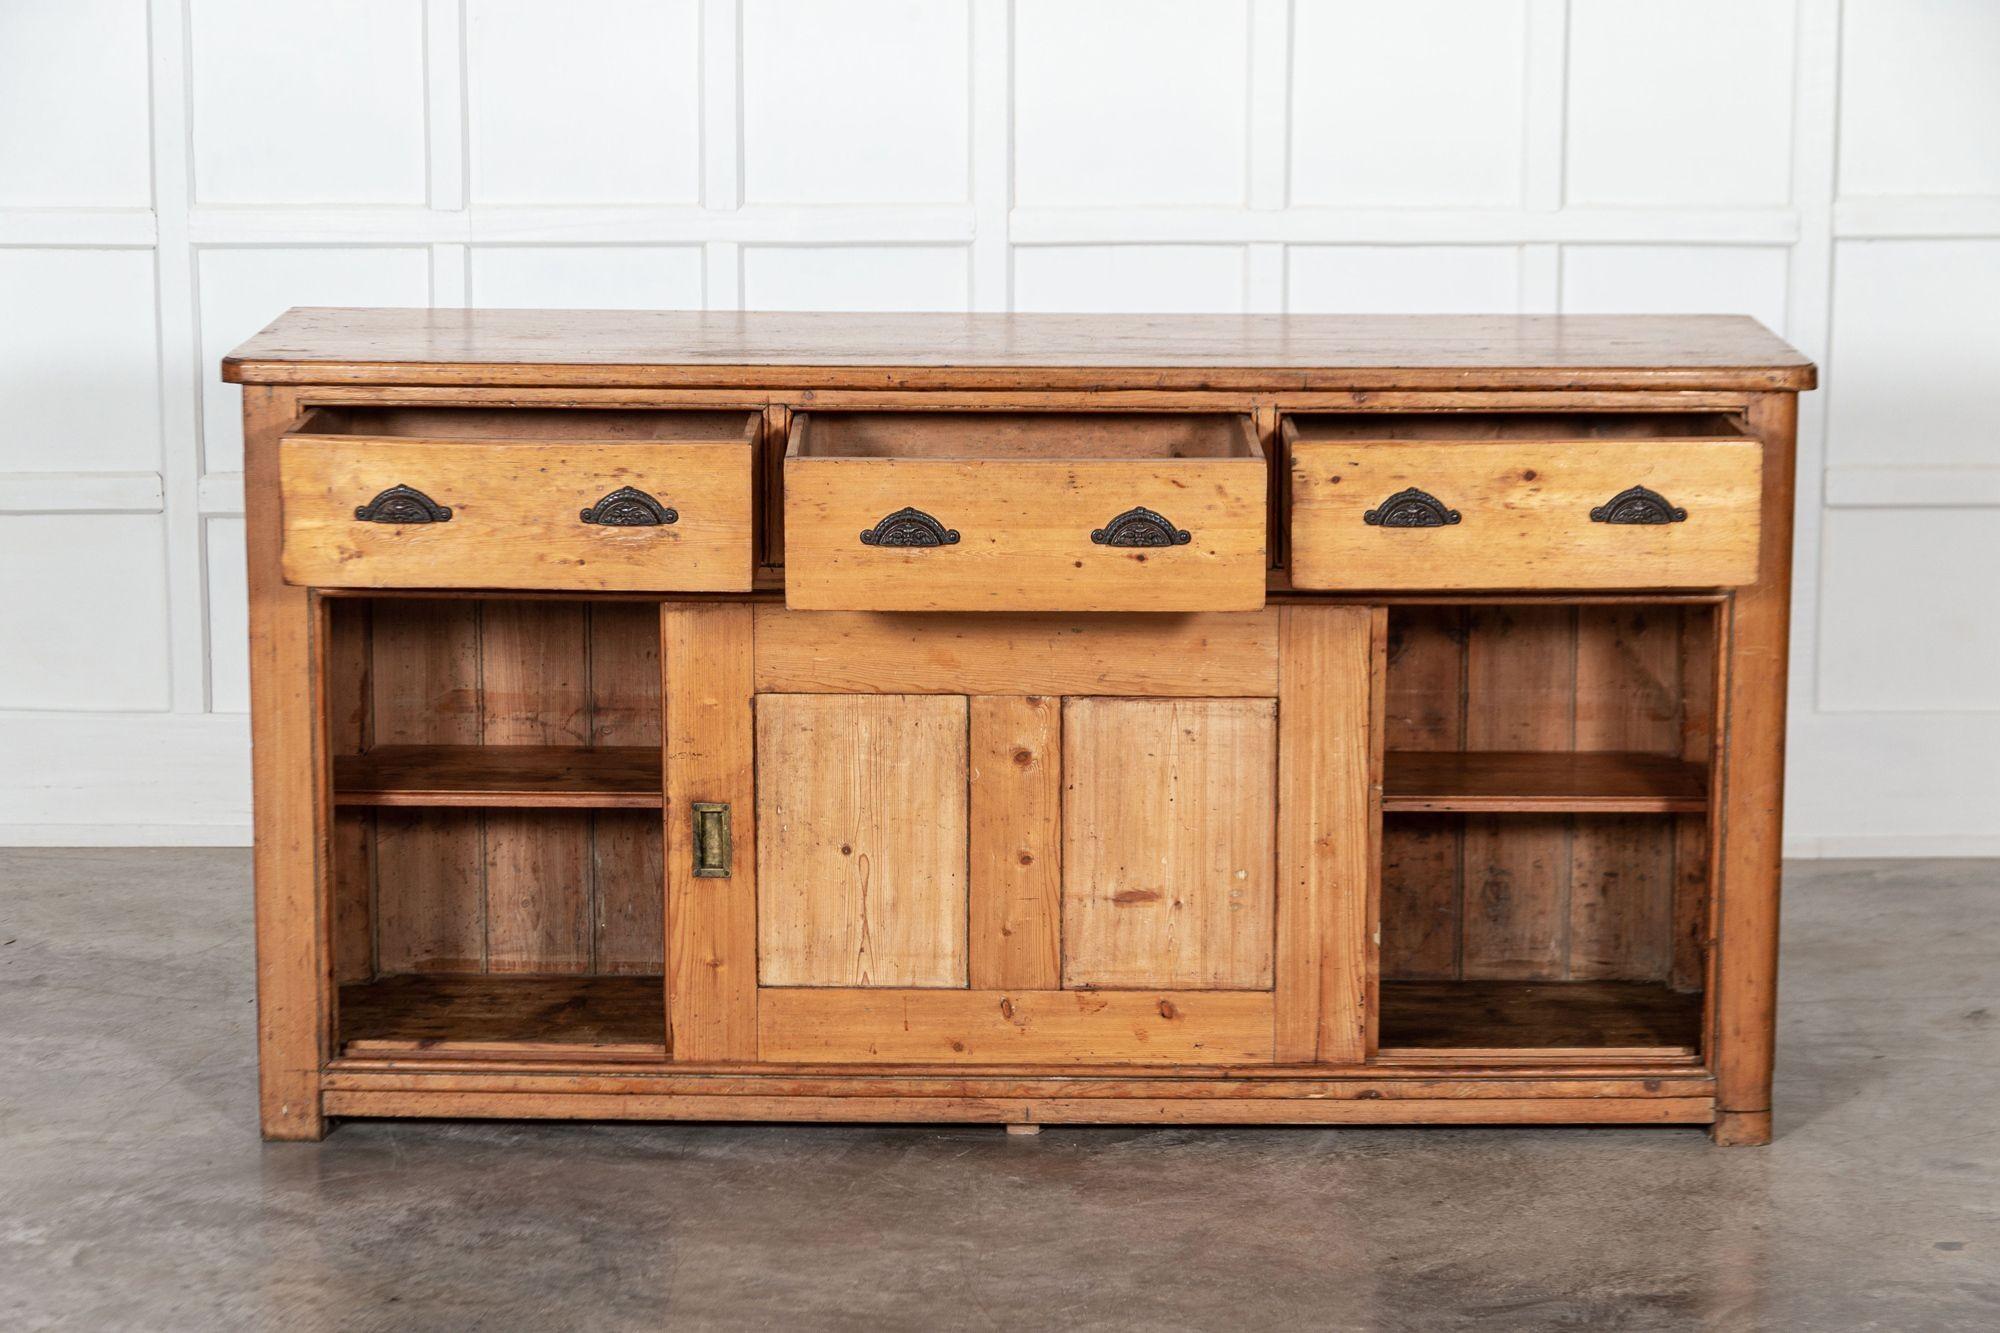 circa 1880
Large 19th century English pine dresser base

We can also customise existing pieces to suit your scheme/requirements. We have our own workshop, restorers and finishers. From adapting to finishing pieces including, stripping, bleaching,